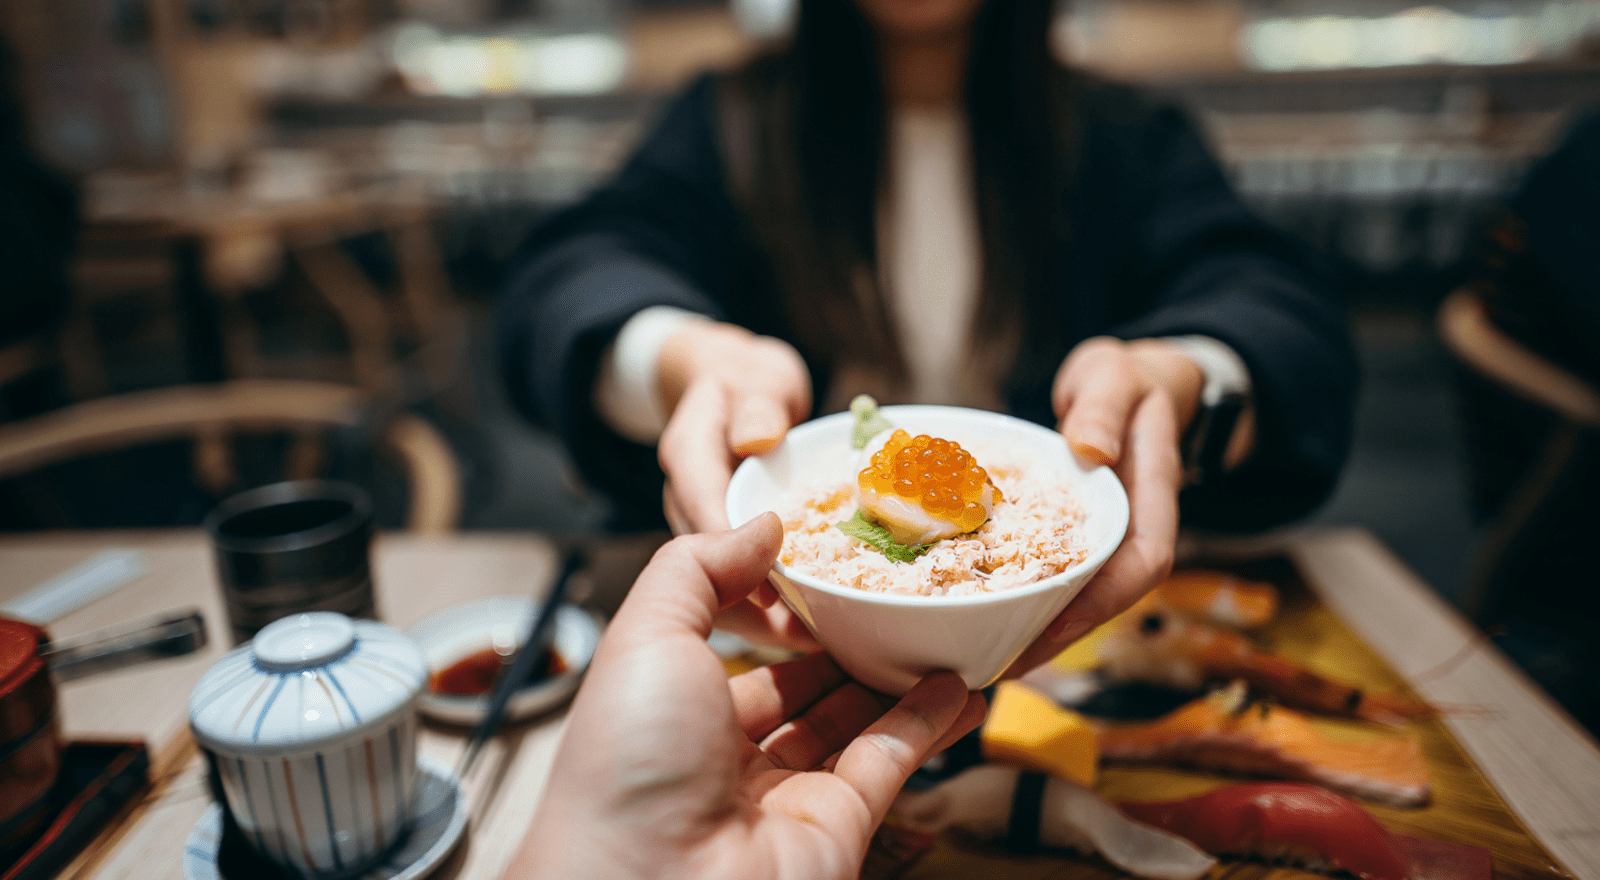 man and woman passing bowl of seafood to each other across table in japan